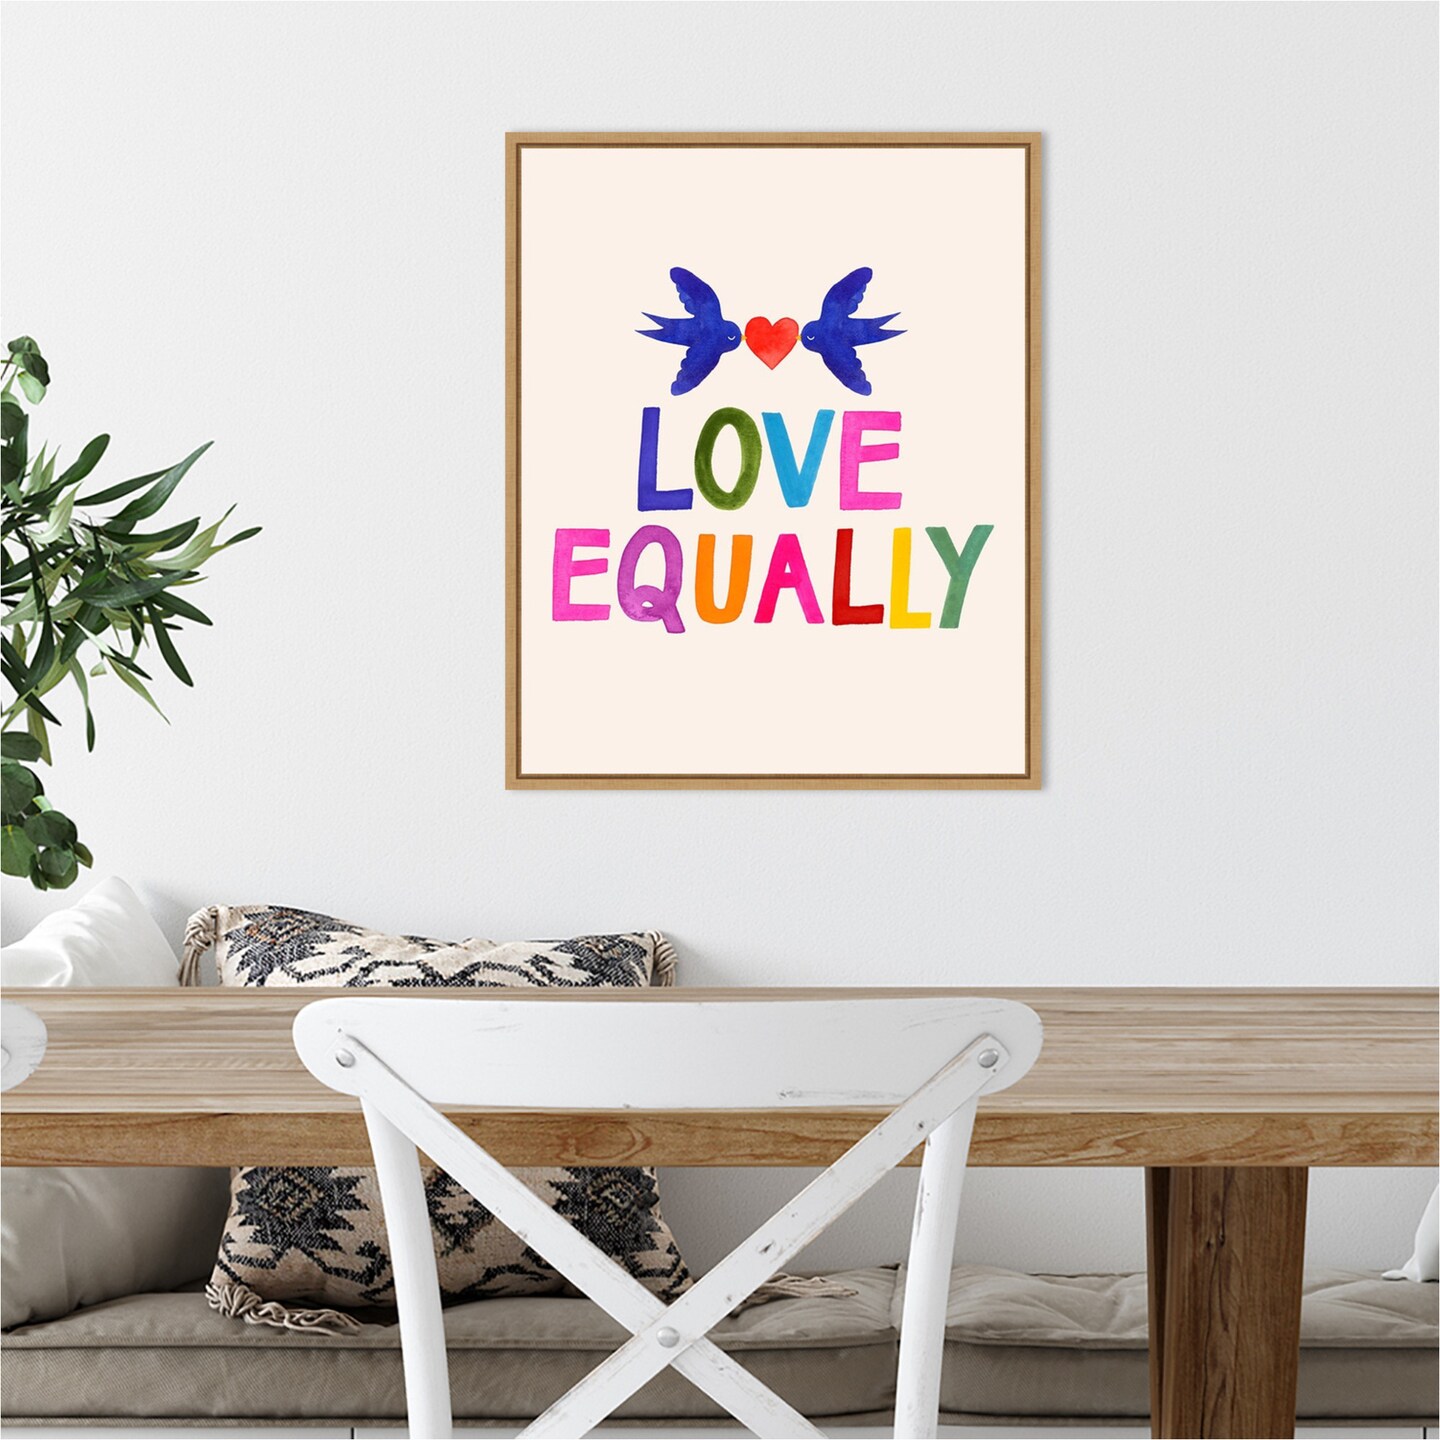 Love Loudly II by Victoria Barnes 16-in. W x 20-in. H. Canvas Wall Art Print Framed in Natural